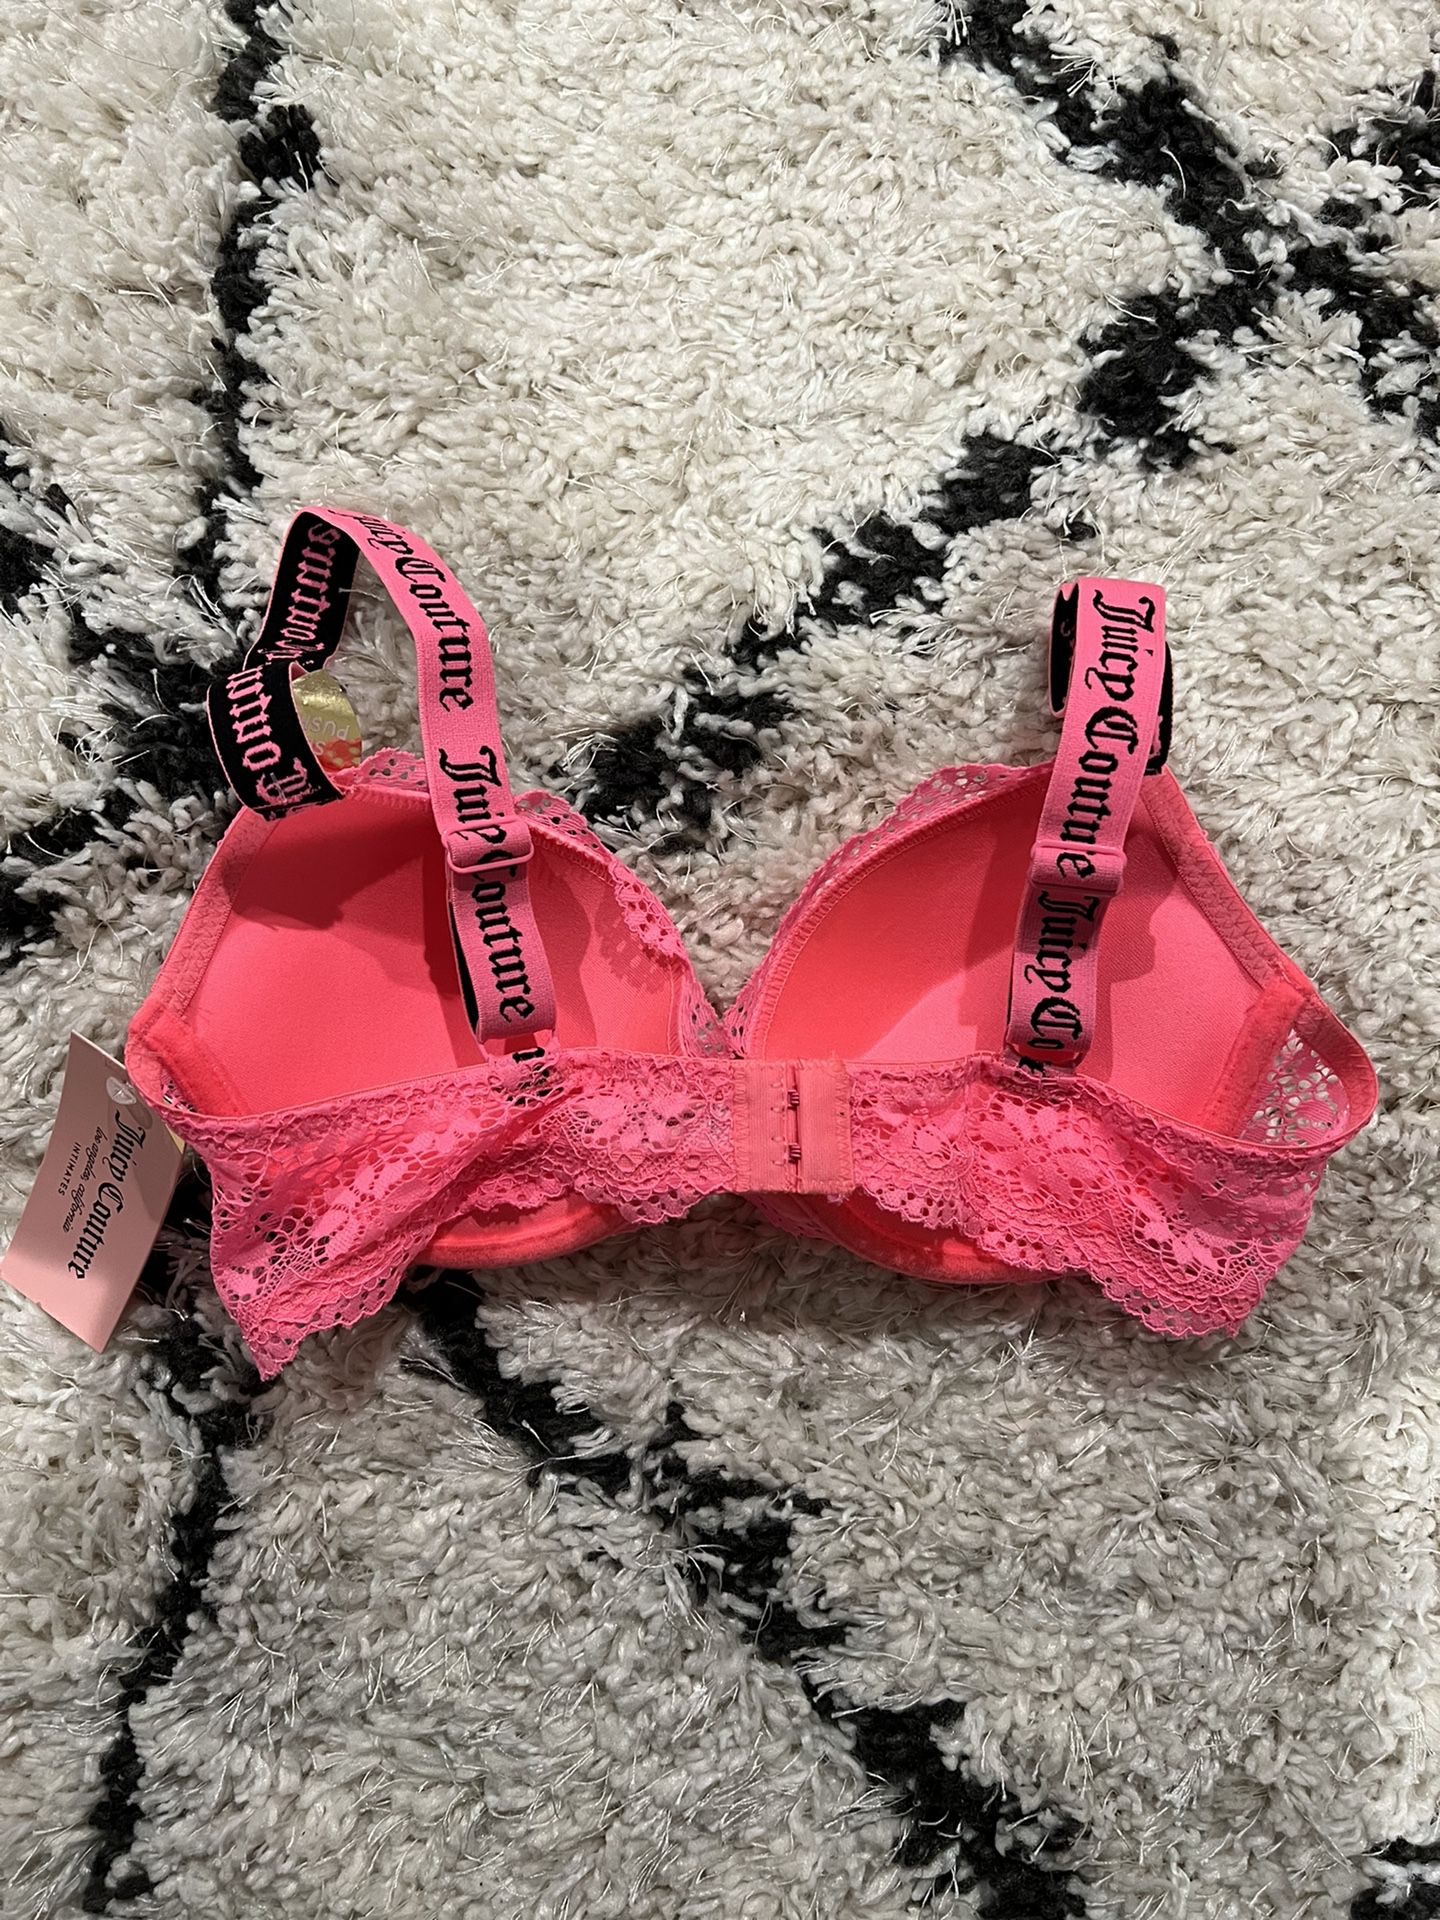 Juicy Couture Sexy Push Up Bra Berry Glam Dark Pink Lace Size 34B - $10 -  From Carol